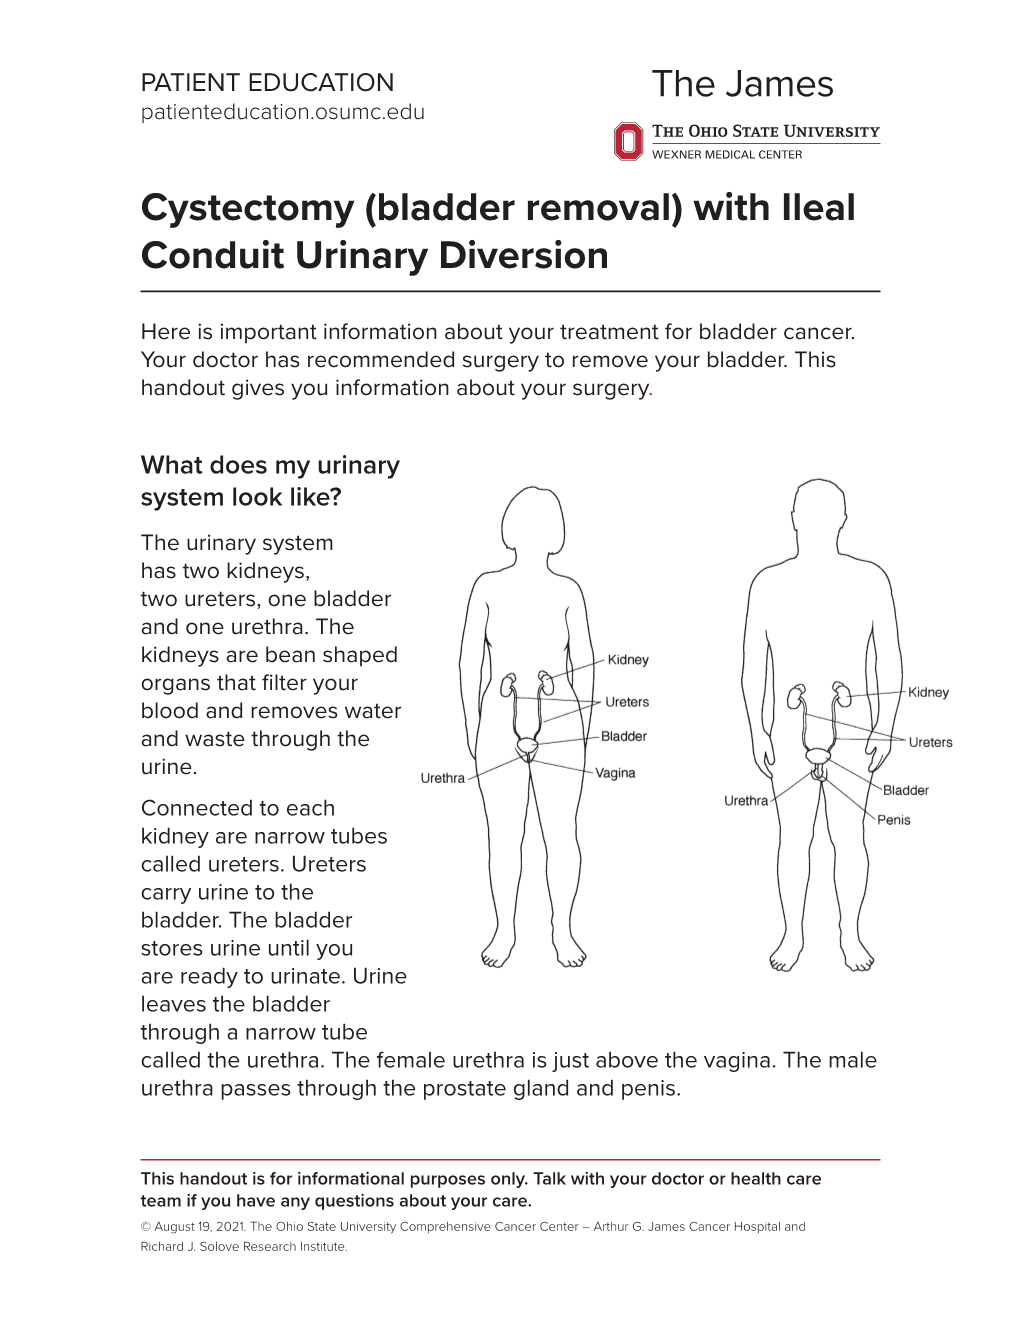 Cystectomy (Bladder Removal) with Ileal Conduit Urinary Diversion